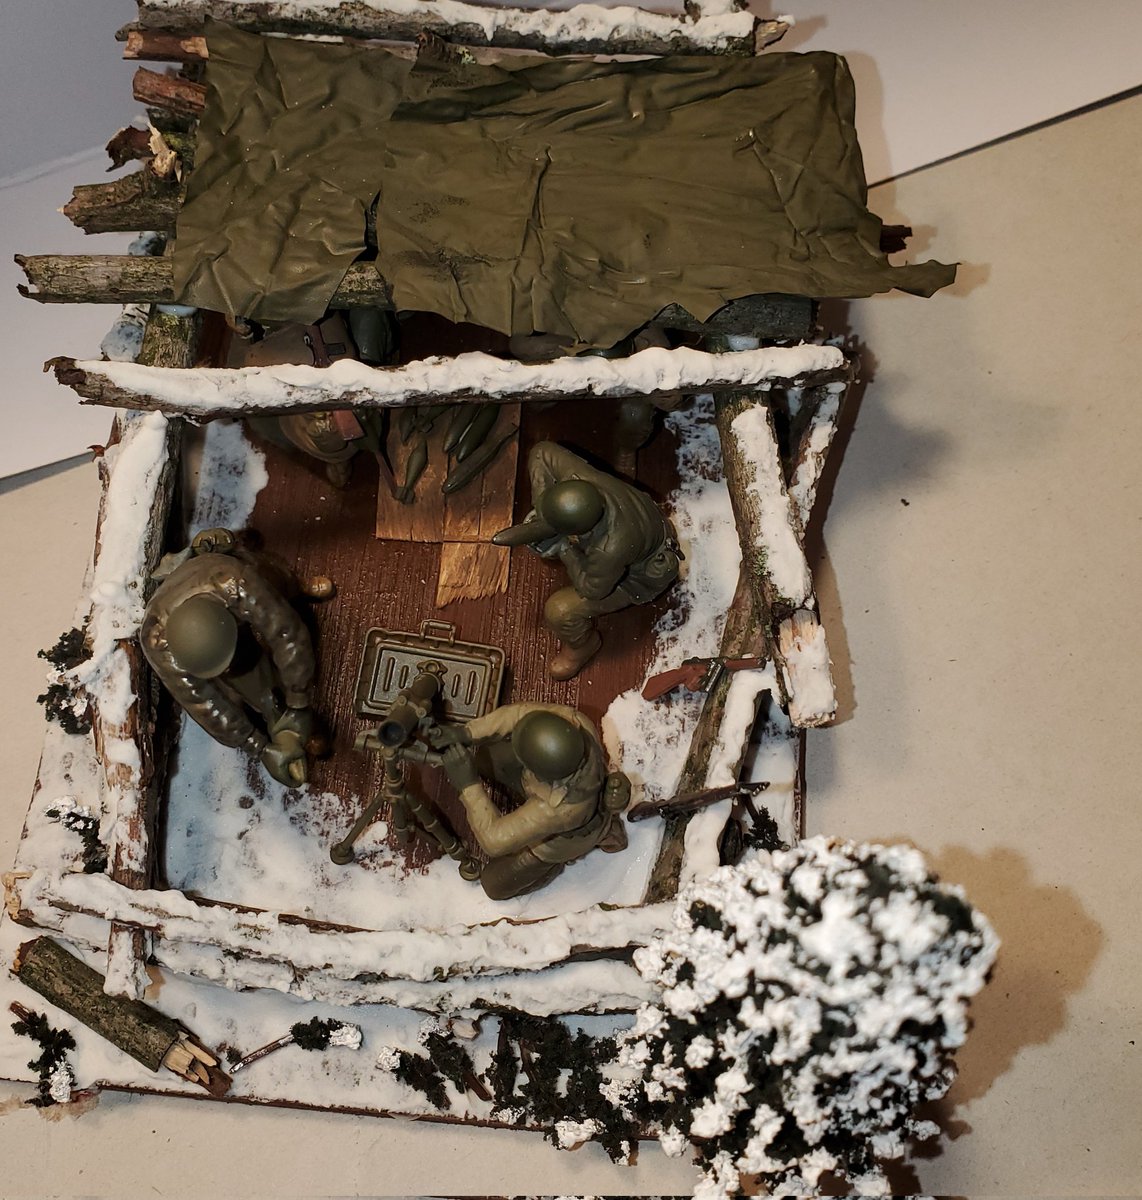 #JFFGREEN
ARDENNES DECEMBER 1944
Thought I'd try something different,  for me.
Figures are(one of my) my weak spots. I've had these Tamiya figures for a long time. As you can see, still weak spot.